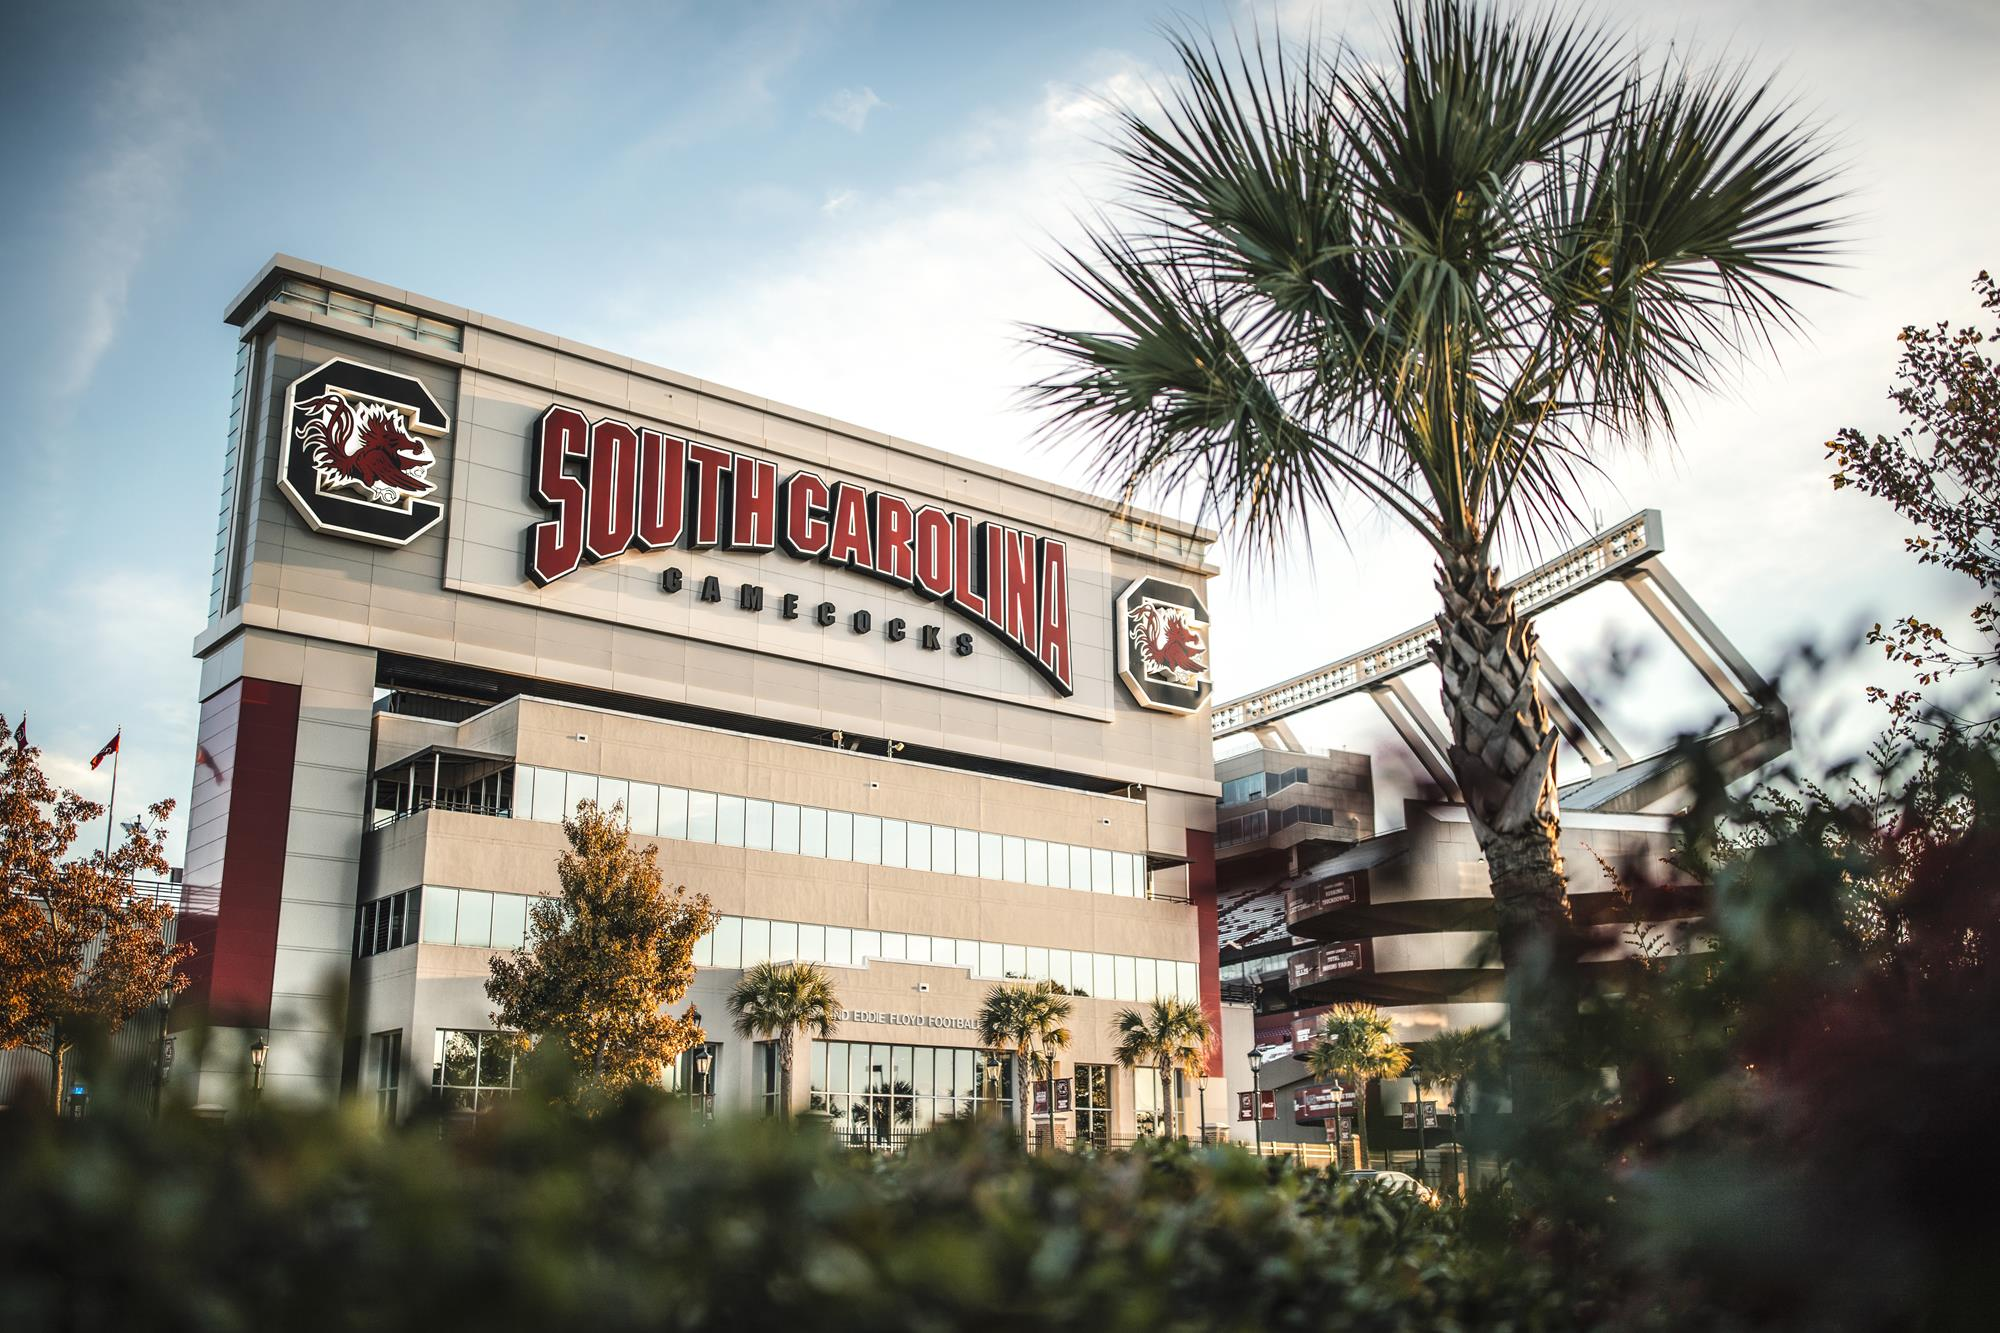 What’s New in 2022 at Williams-Brice